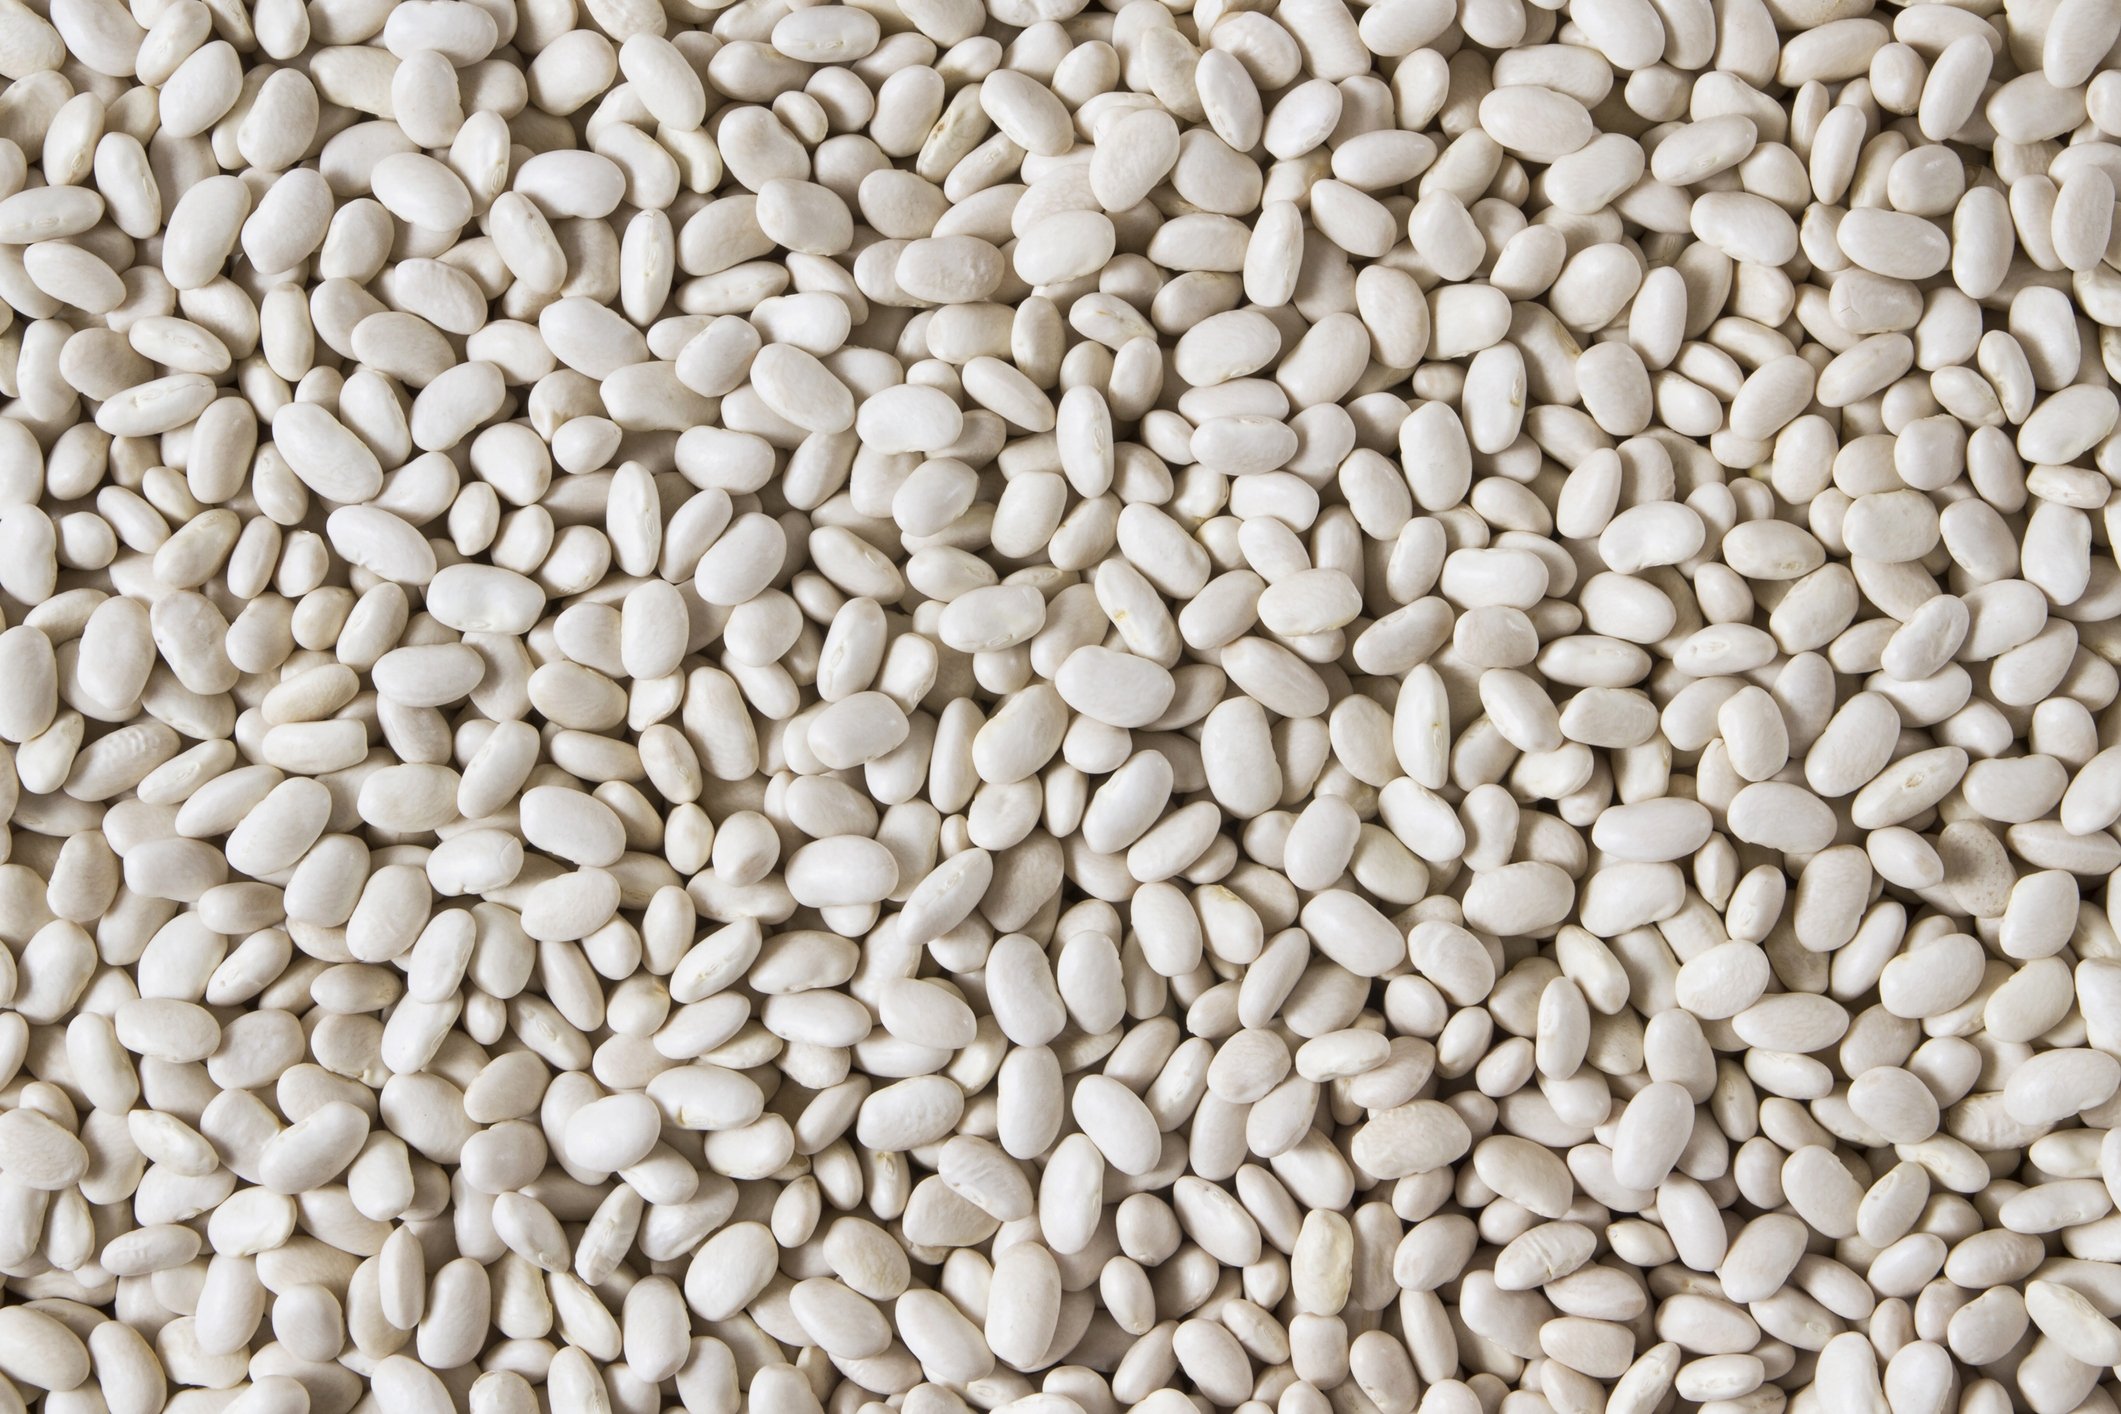 Cannellini beans, also called white kidney beans, often are used in Turkish stews and salads. (iStock Photo)